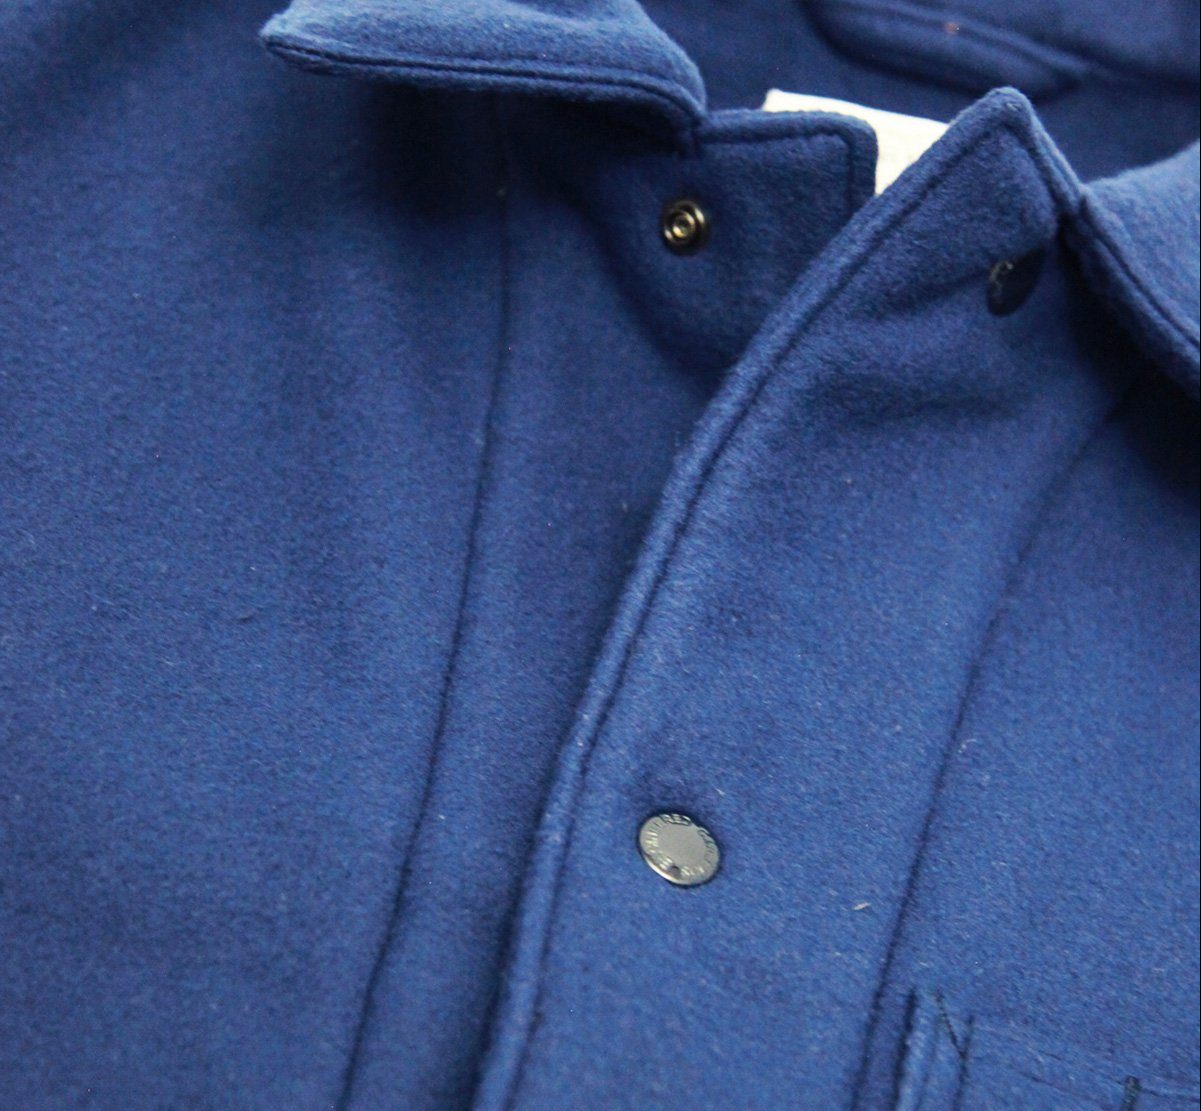 Deeper in the Pile: Seven Alternatives to the Standard Patagonia Fleece ...